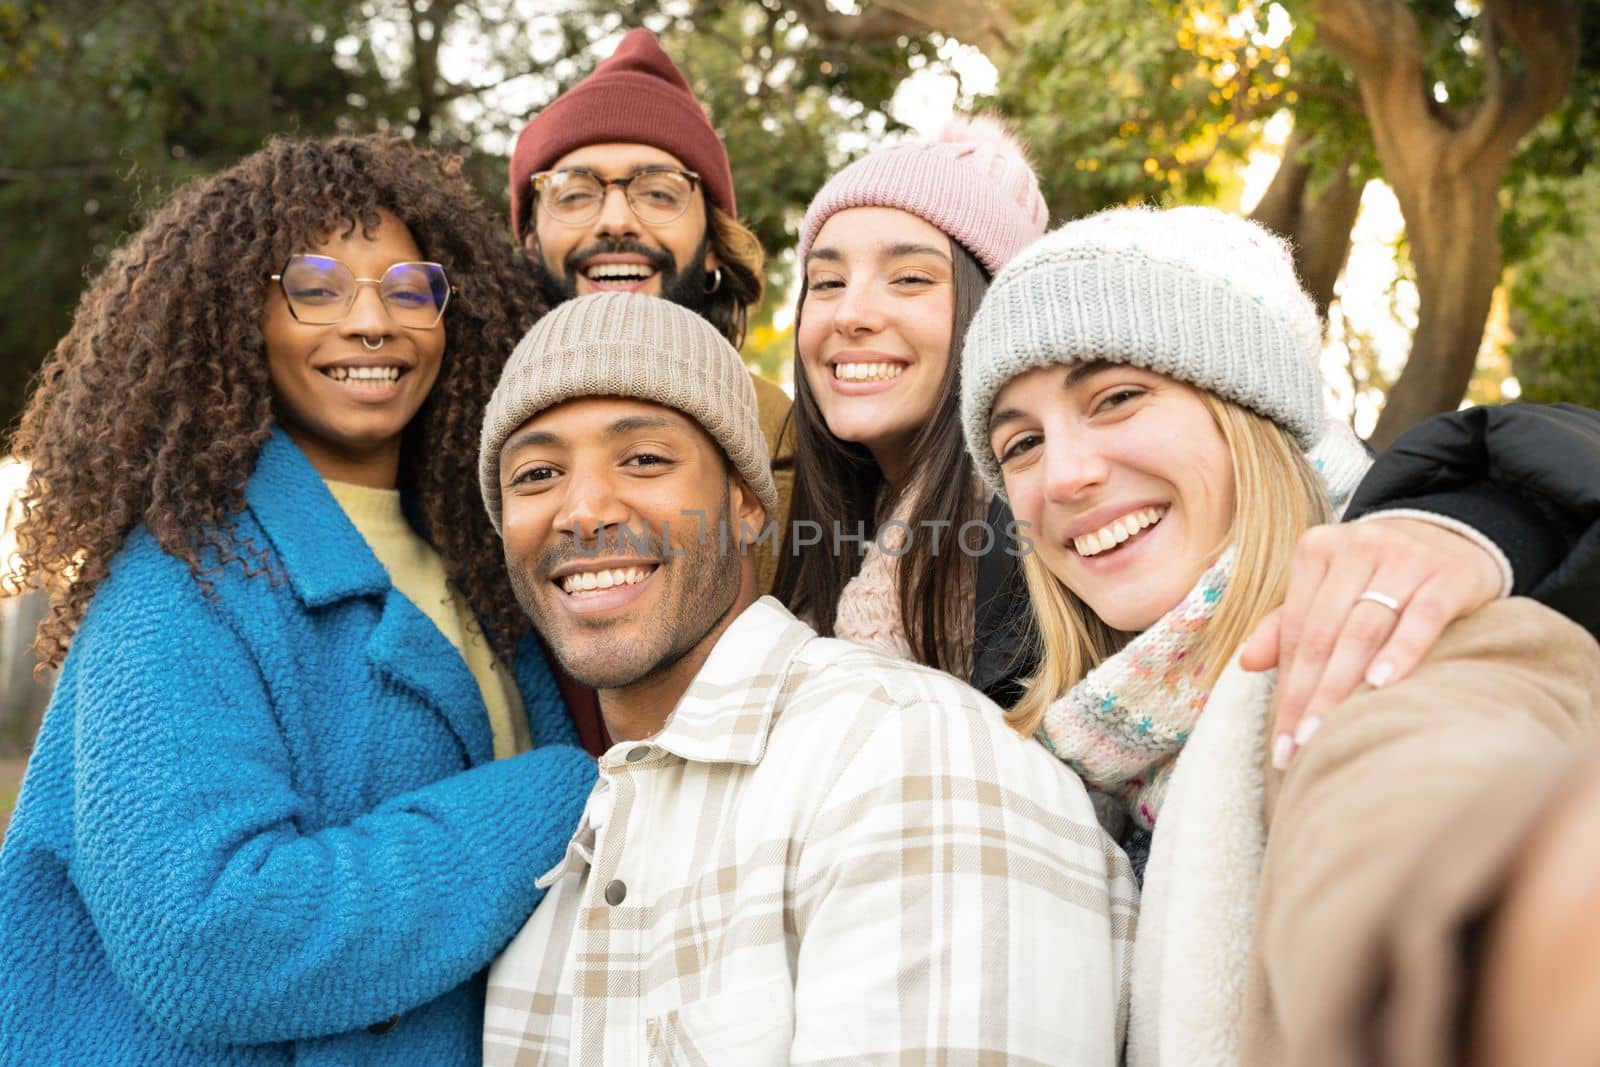 Big group of cheerful young friends taking selfie portrait. Happy people looking at the camera smiling. Concept of community, youth lifestyle and friendship. high quality photo